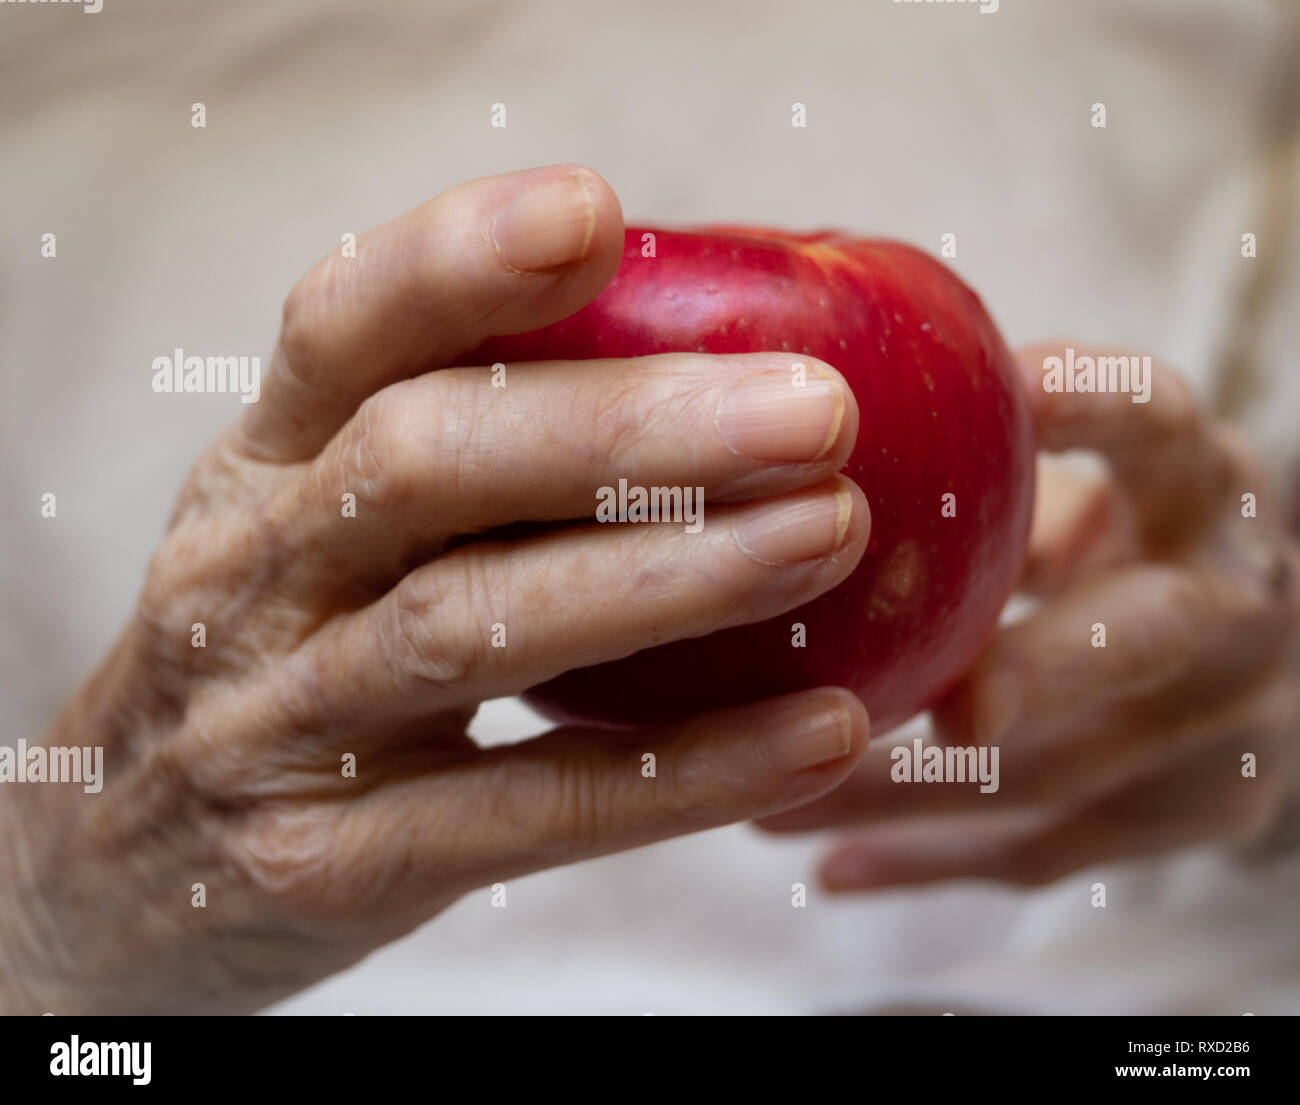 An elderly caucasian woman's hands holding a ripe red apple against an off white background. Shallow depth of field. Stock Photo